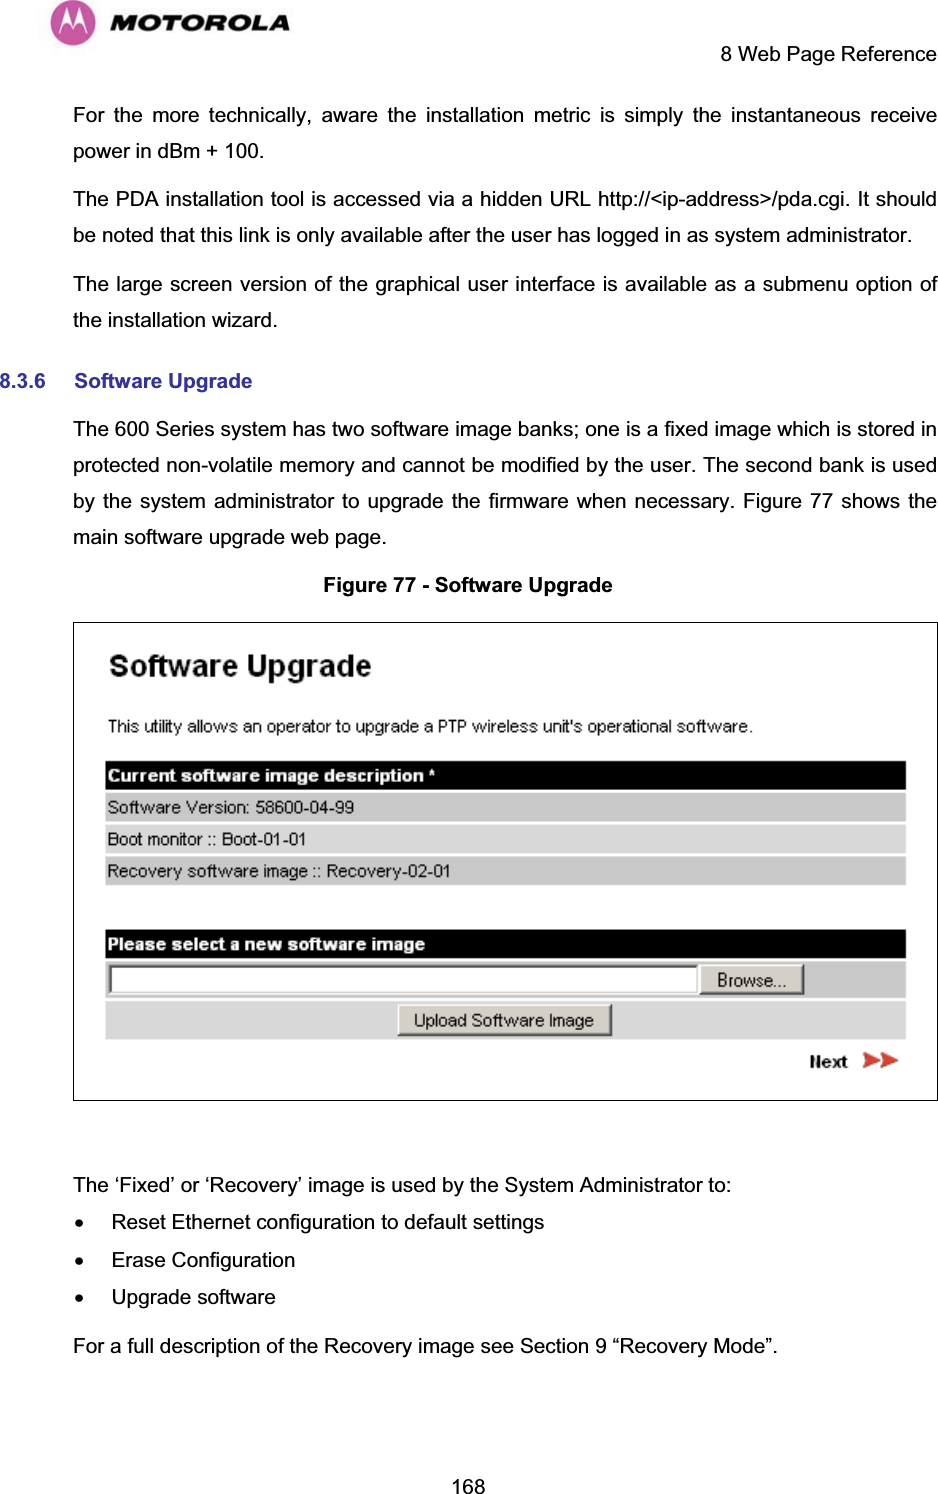     8 Web Page Reference  168For the more technically, aware the installation metric is simply the instantaneous receive power in dBm + 100. The PDA installation tool is accessed via a hidden URL http://&lt;ip-address&gt;/pda.cgi. It should be noted that this link is only available after the user has logged in as system administrator. The large screen version of the graphical user interface is available as a submenu option of the installation wizard. 8.3.6 Software Upgrade The 600 Series system has two software image banks; one is a fixed image which is stored in protected non-volatile memory and cannot be modified by the user. The second bank is used by the system administrator to upgrade the firmware when necessary. Figure 77 shows the main software upgrade web page. Figure 77 - Software Upgrade   The ‘Fixed’ or ‘Recovery’ image is used by the System Administrator to: x  Reset Ethernet configuration to default settings x Erase Configuration x Upgrade software For a full description of the Recovery image see Section 9 “Recovery Mode”.  